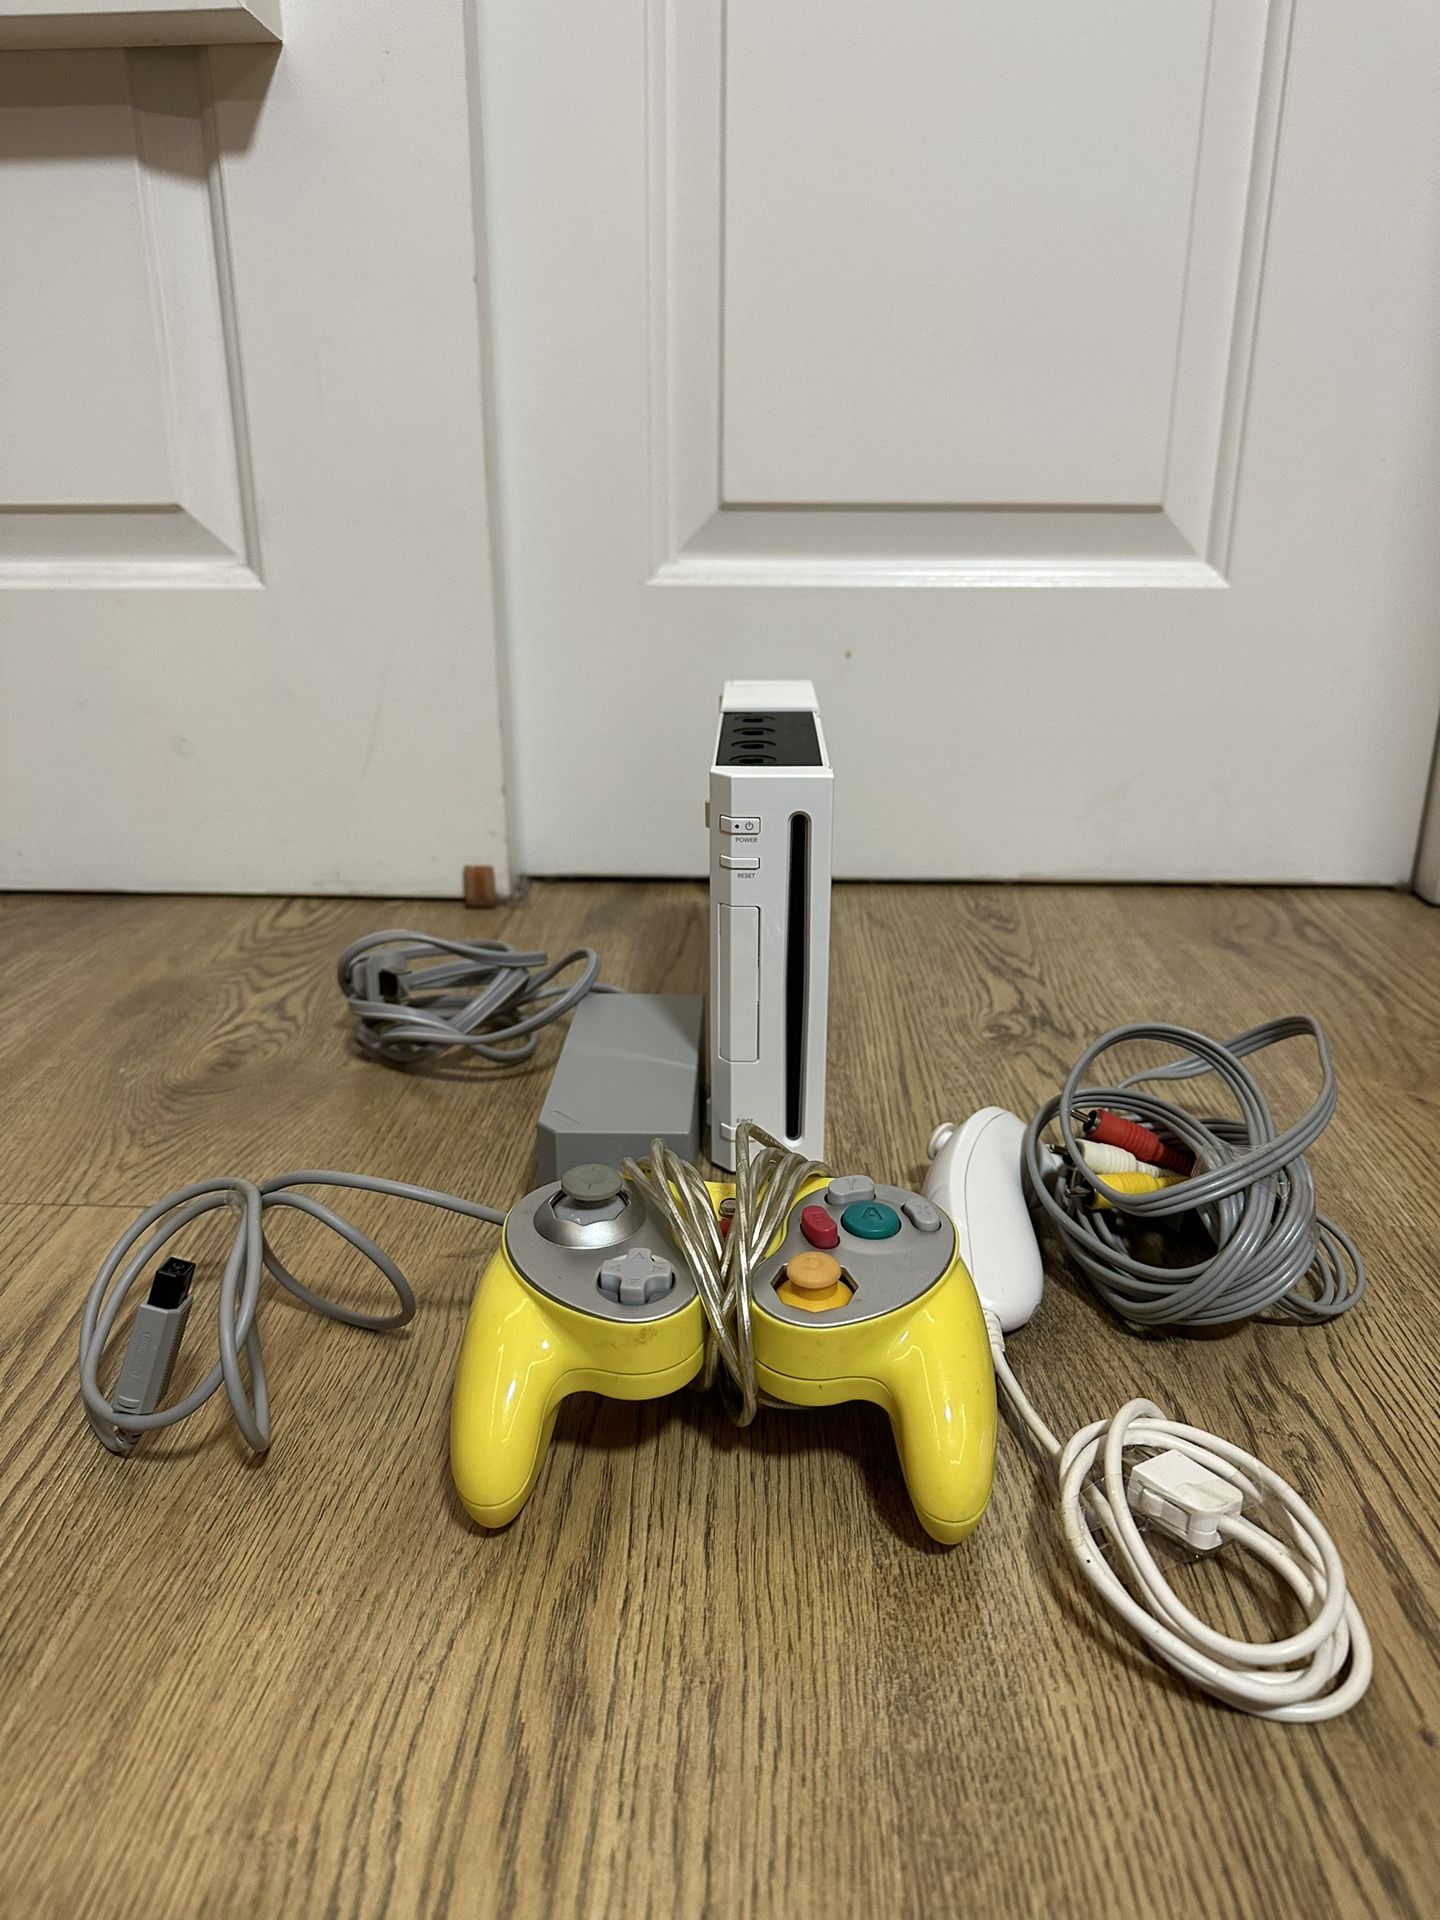 Nintendo Wii Without Wii Controller